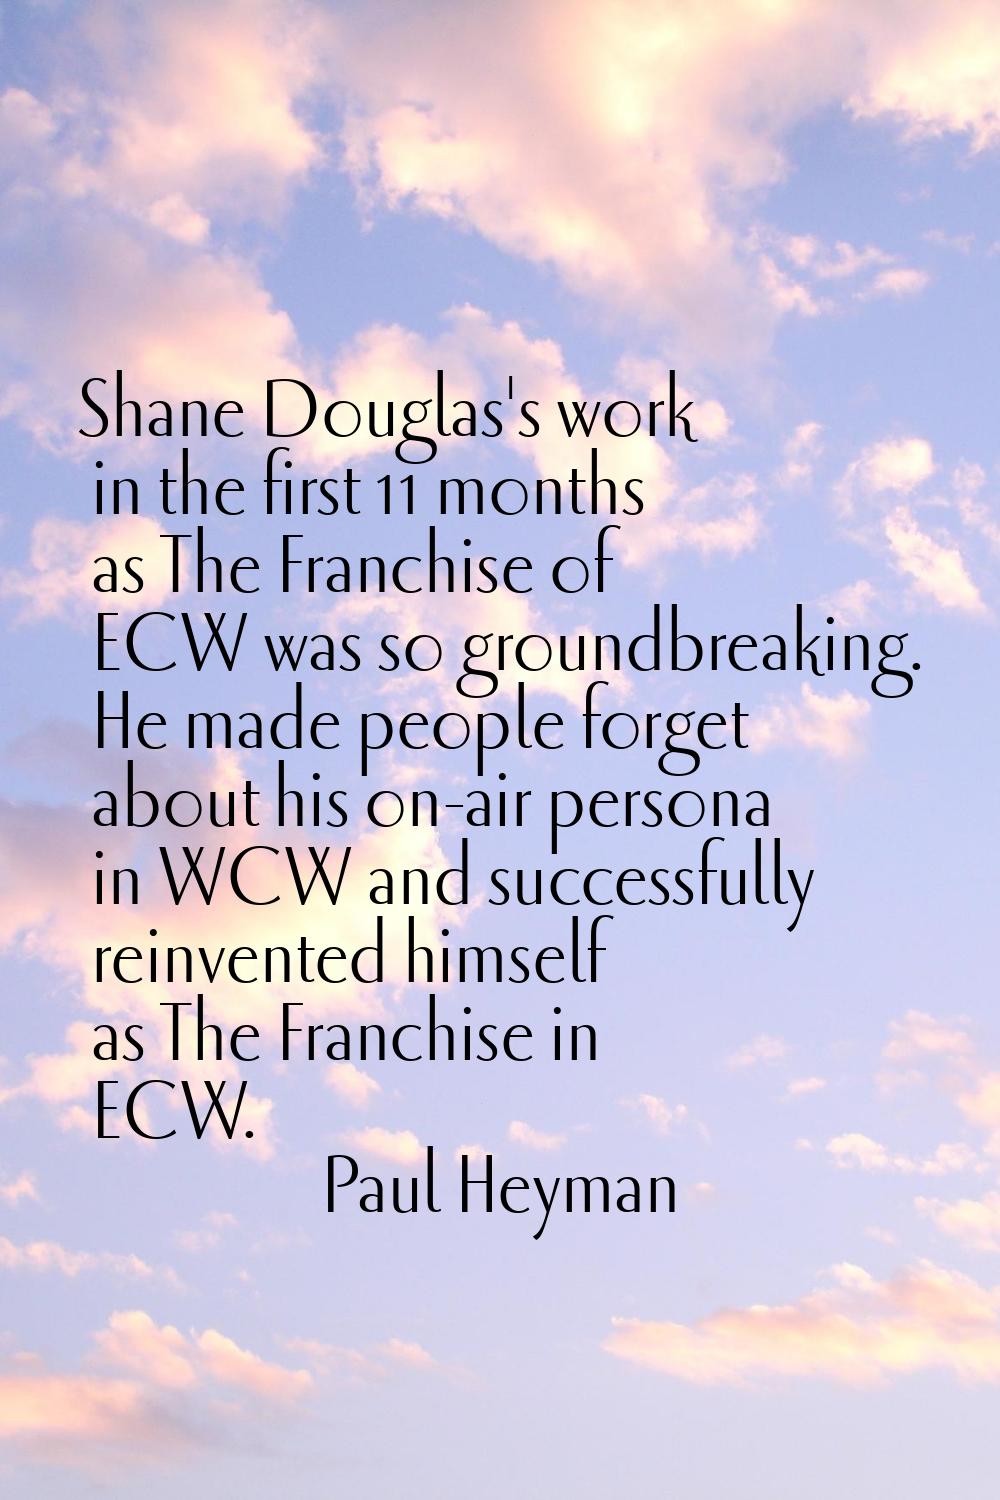 Shane Douglas's work in the first 11 months as The Franchise of ECW was so groundbreaking. He made 